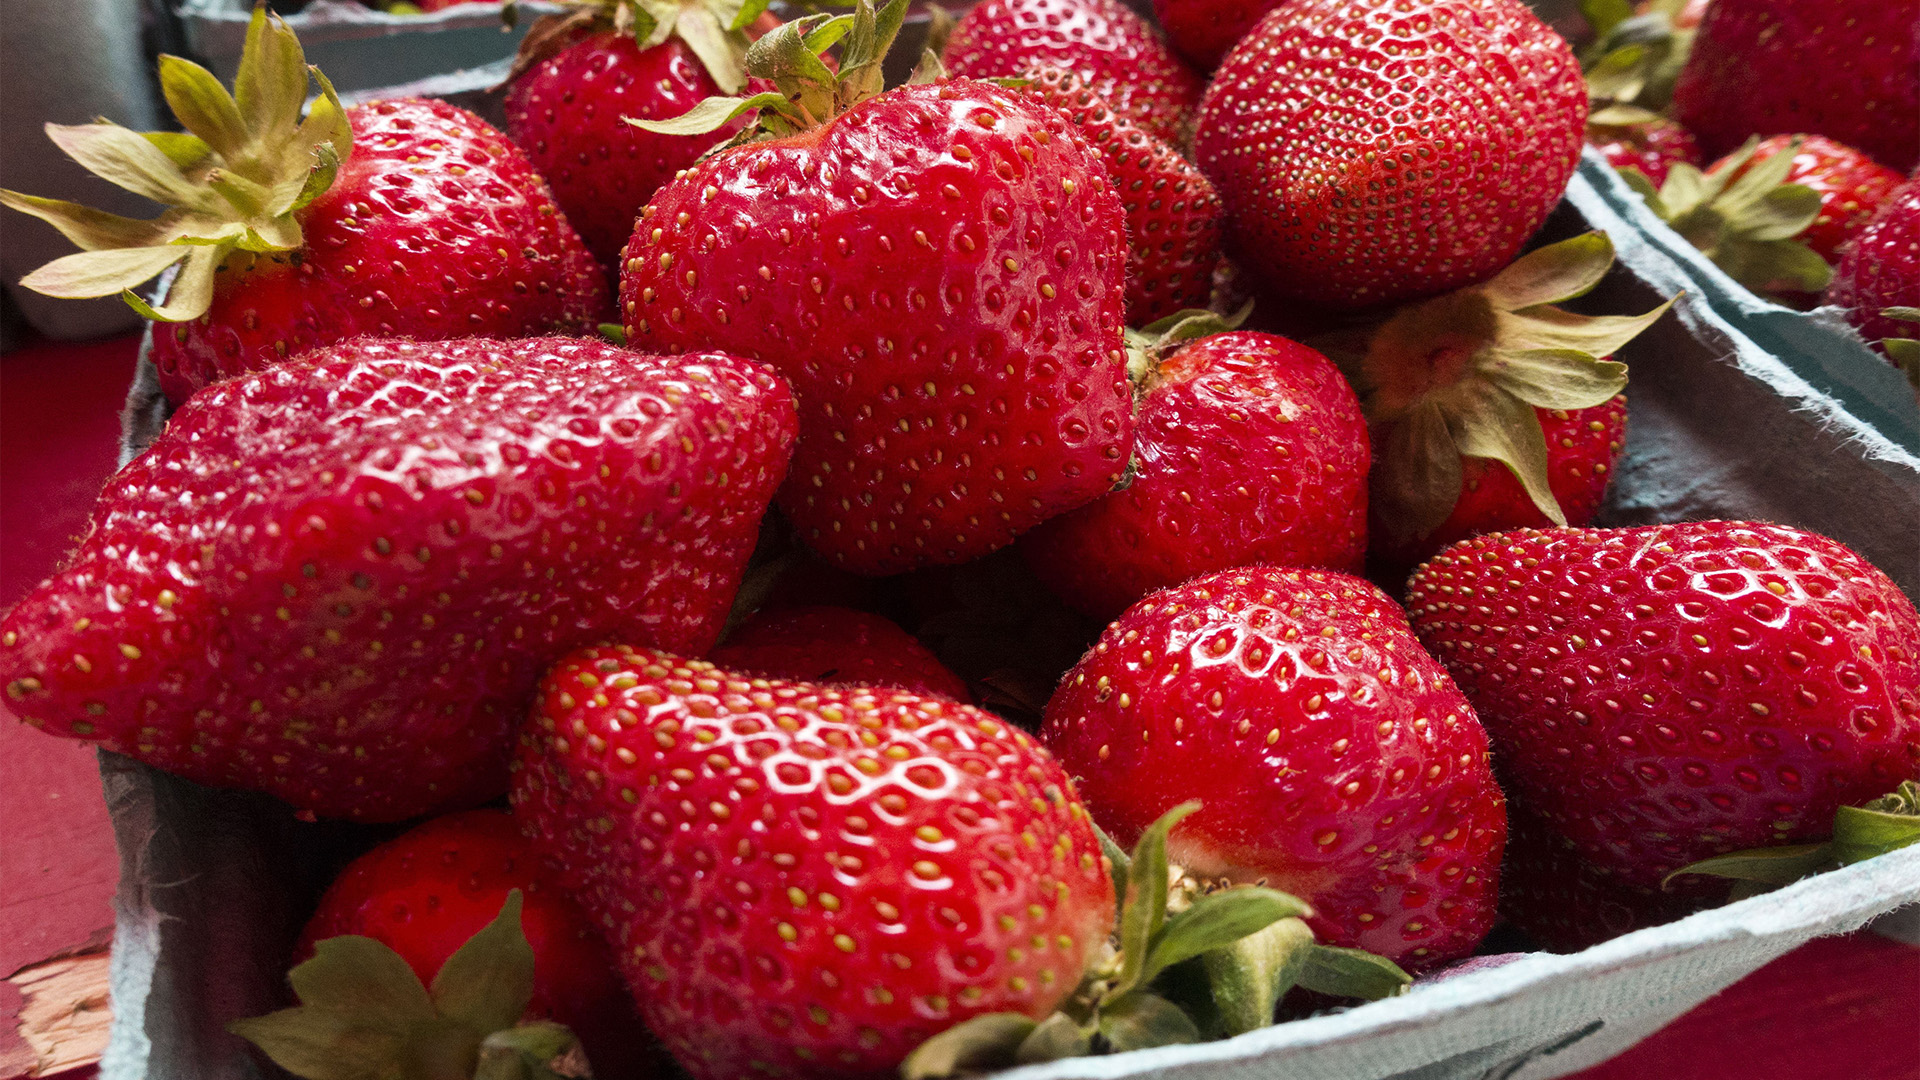 Traffic advisories issued for Ponchatoula Strawberry Festival